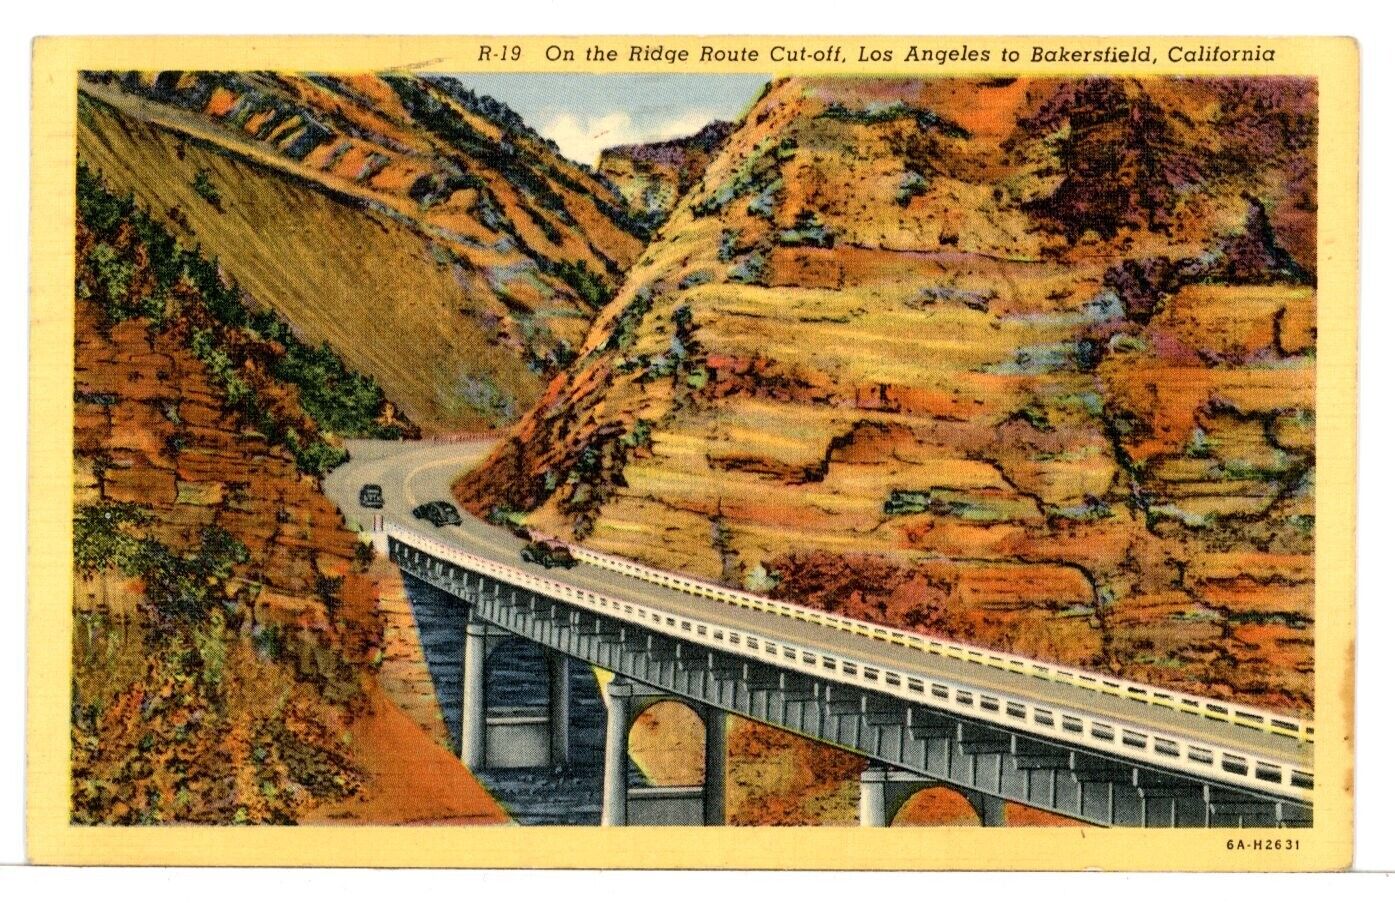 1949 - On the Ridge Route Cut-off, Los Angeles to Bakersfield, CA Postcard